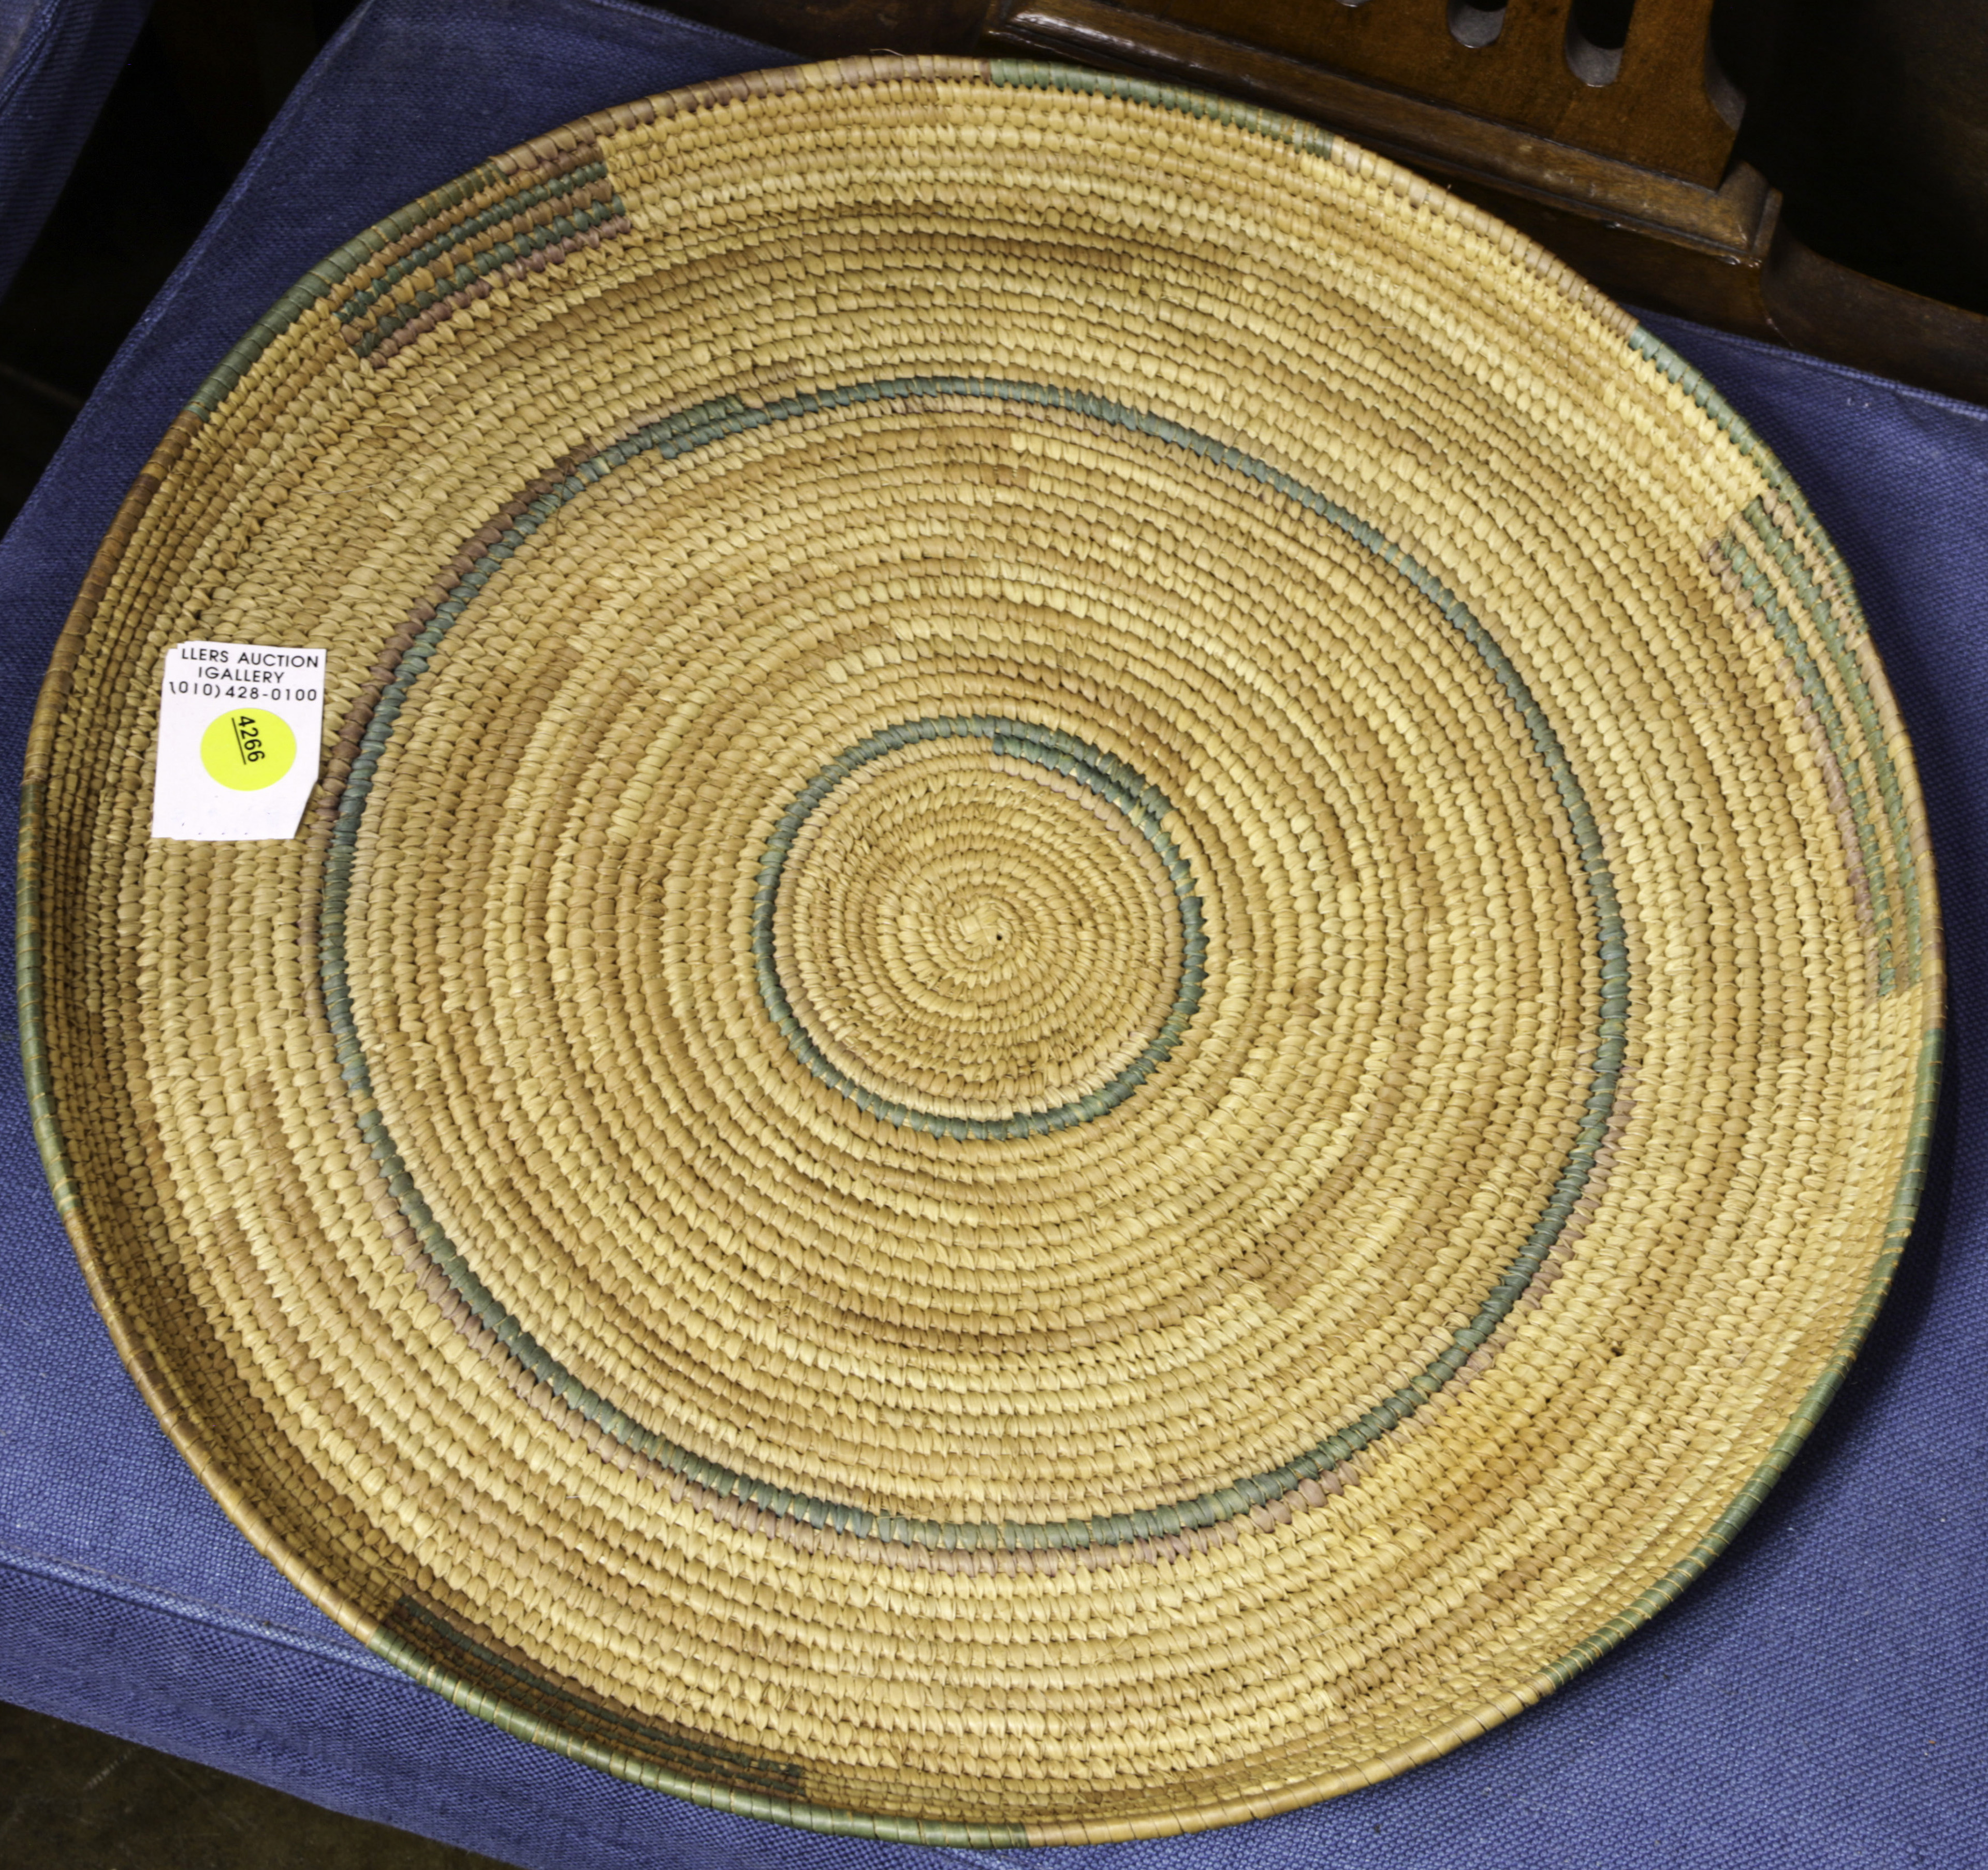 A BASKETRY TRAY A basketry tray  3a665d